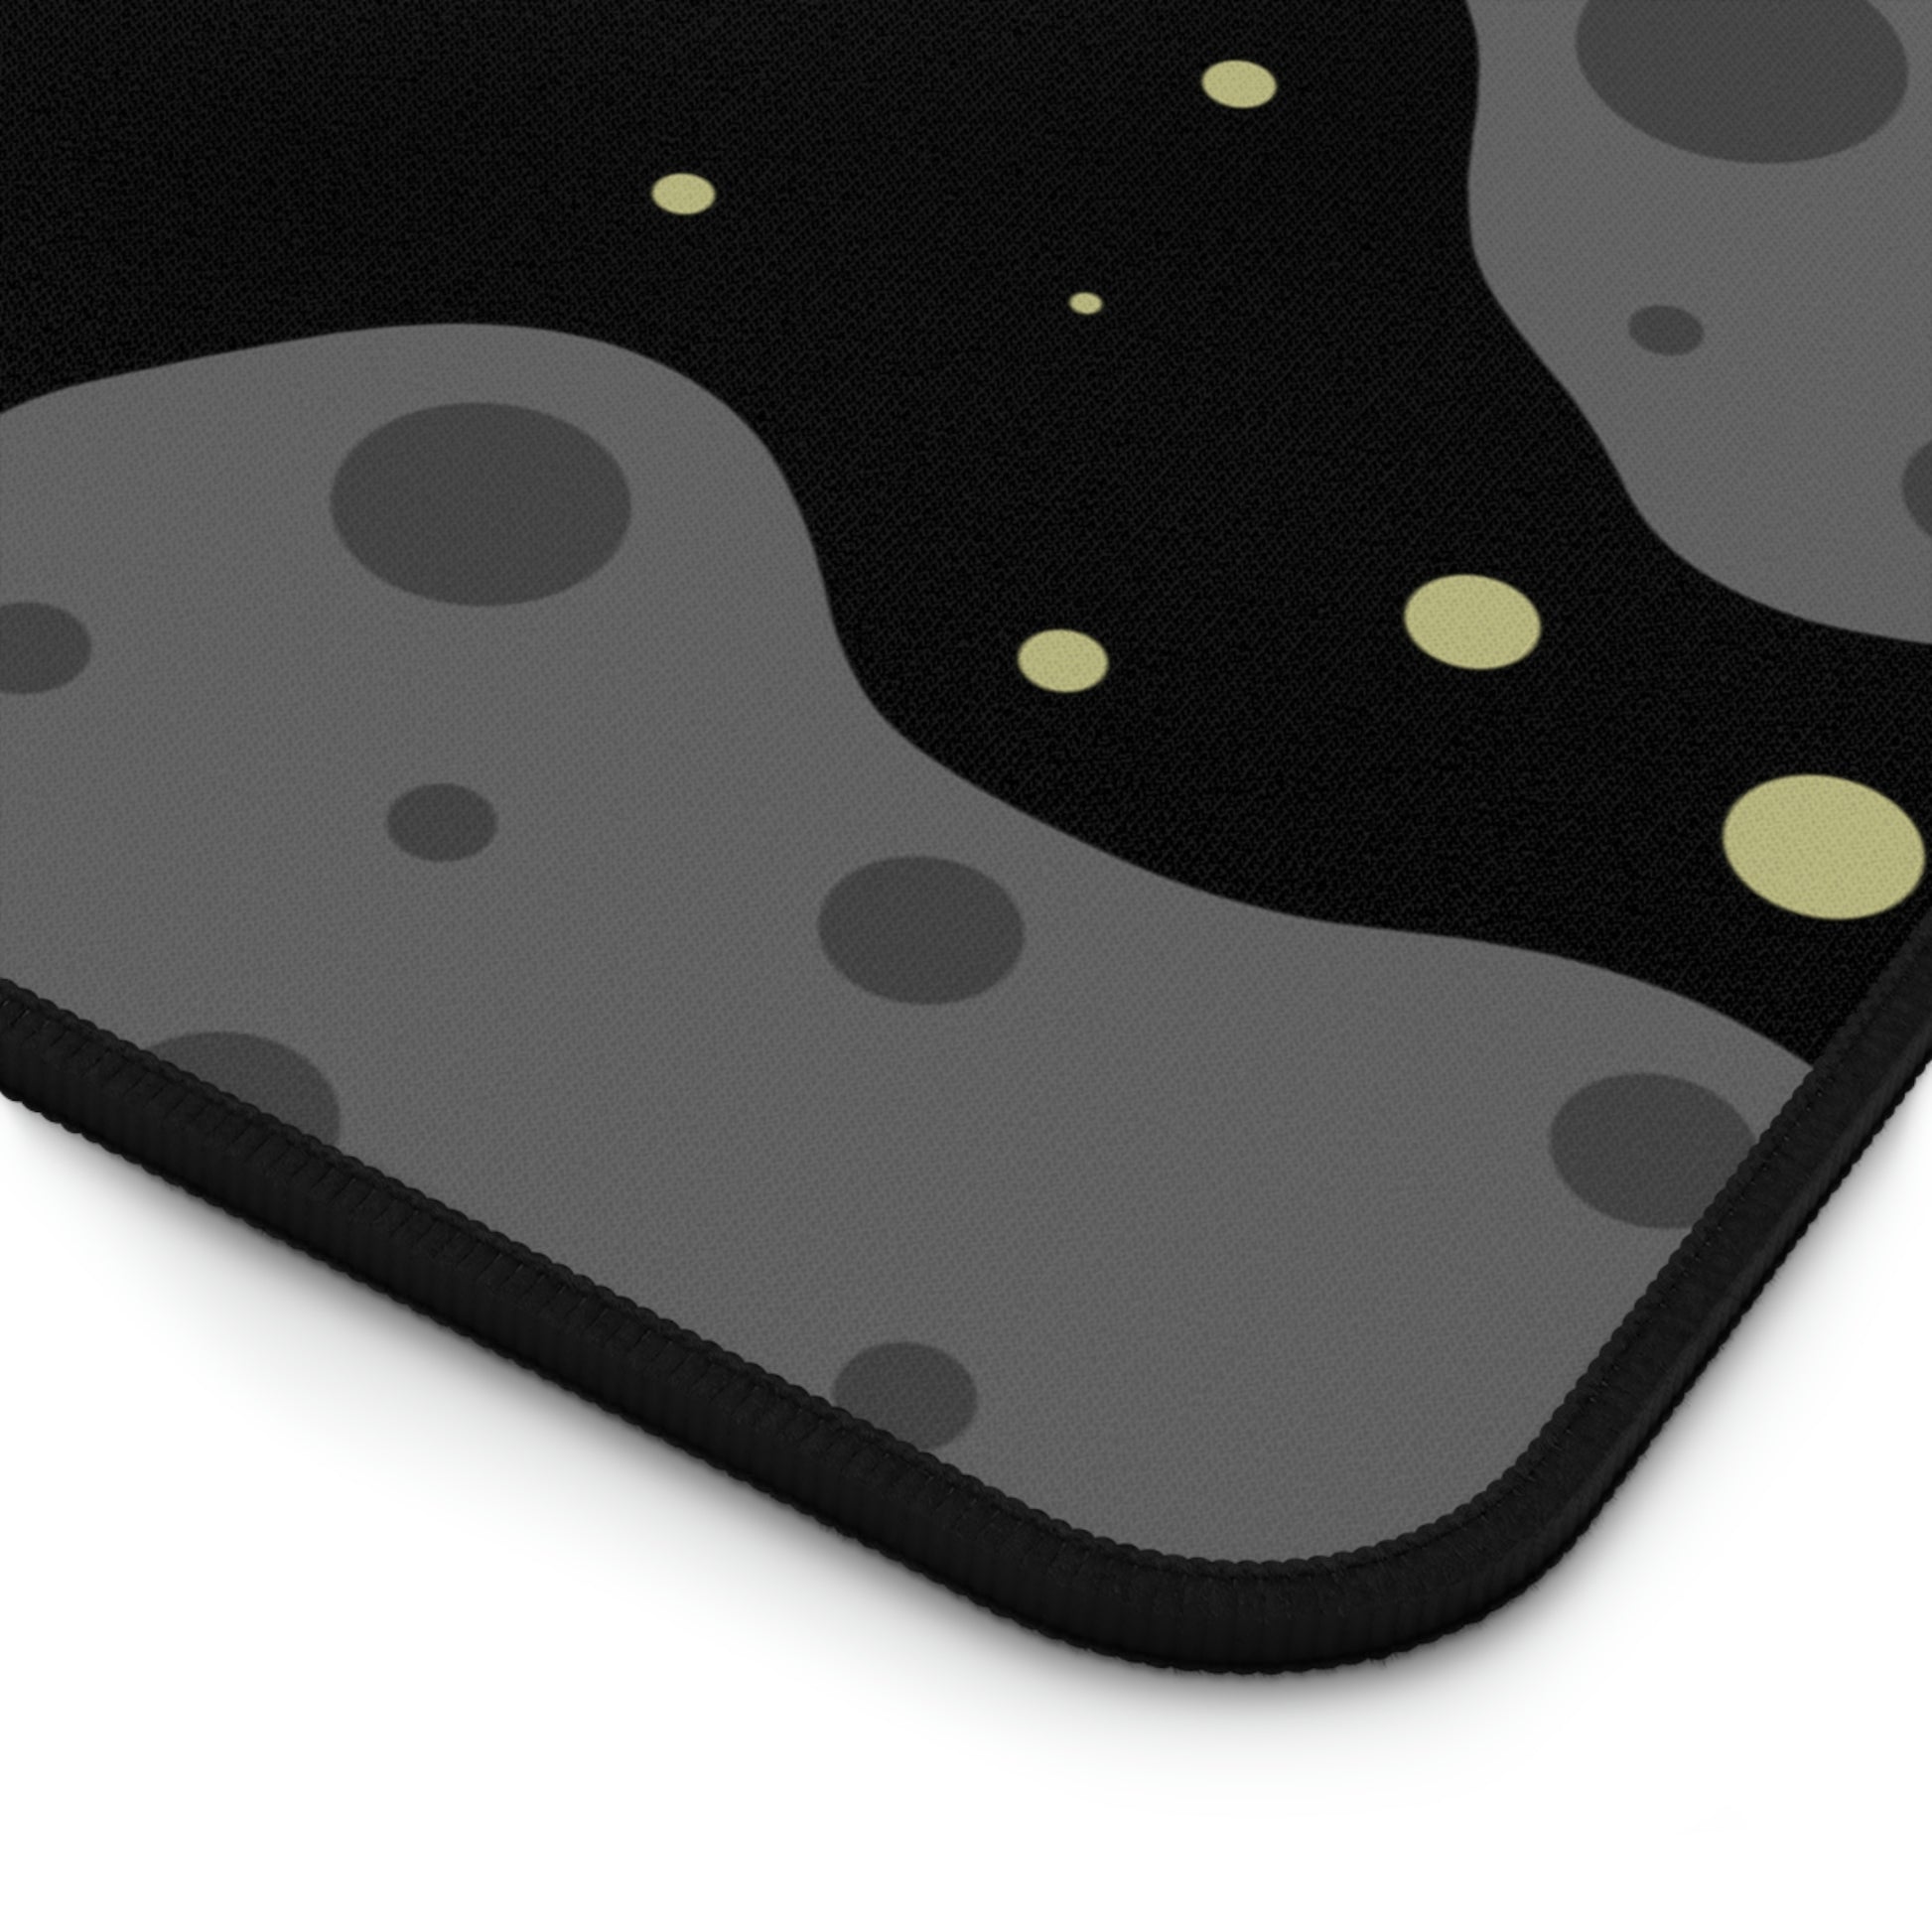 The corner of a 12" x 22" desk mat with a black background, gray asteroids, and yellow stars.